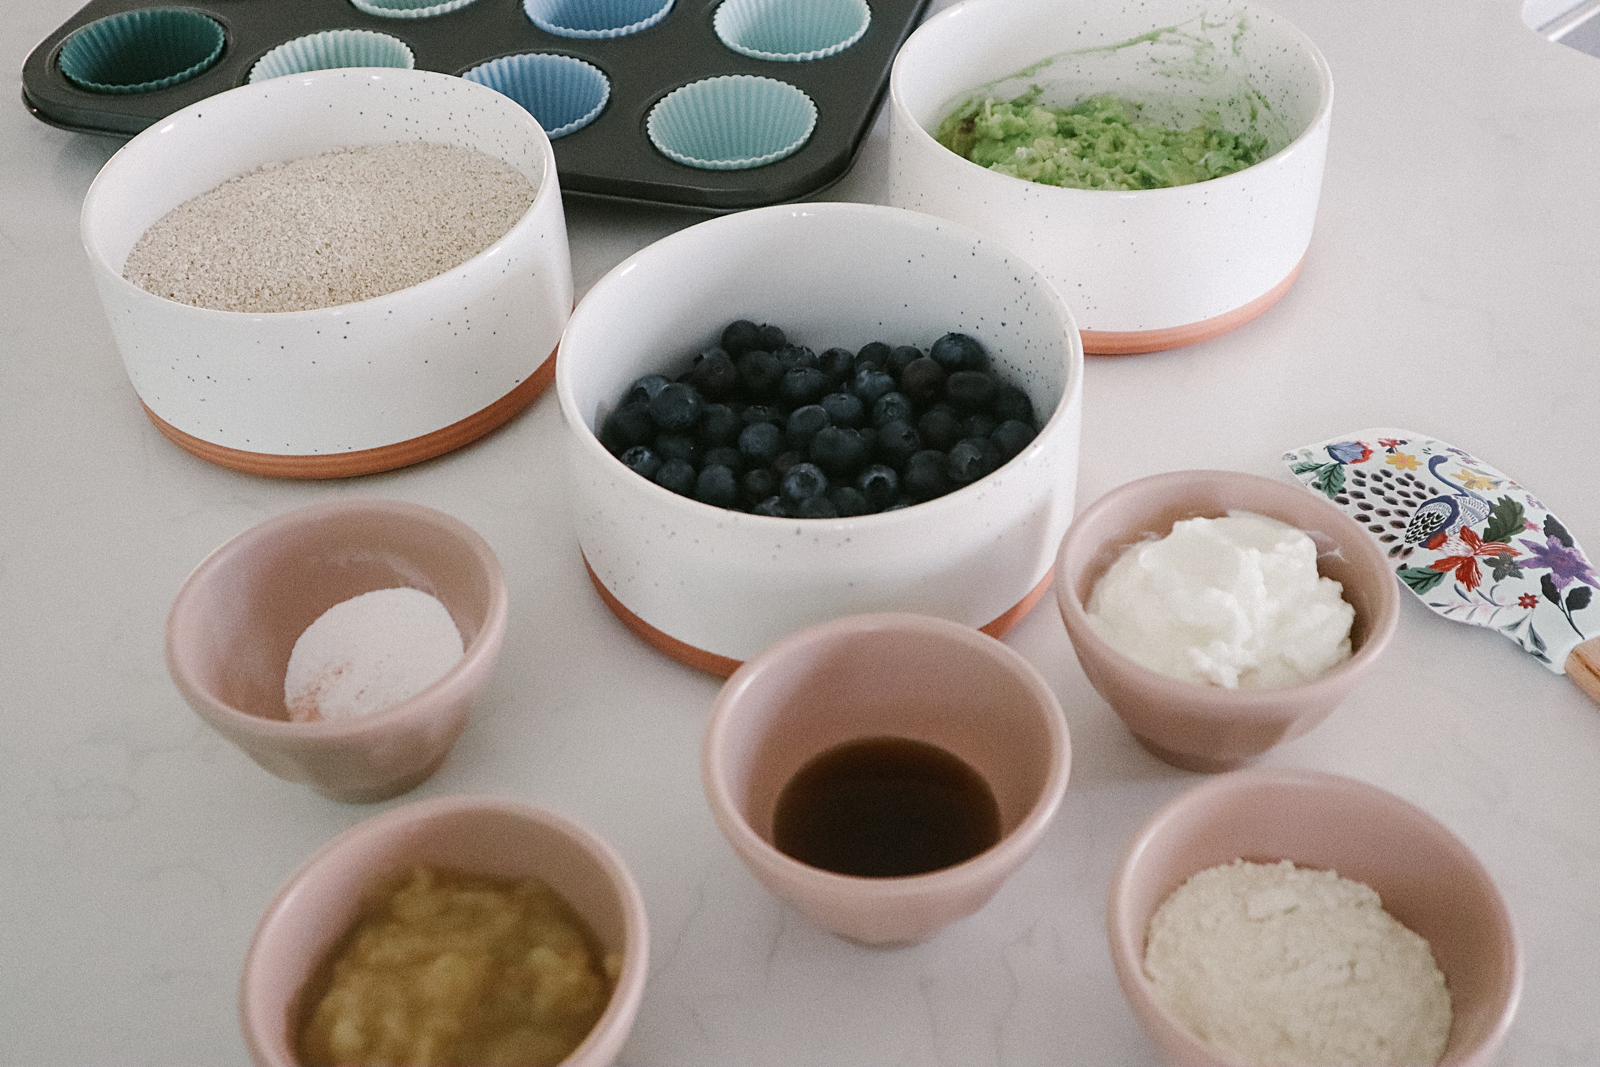 Avocado Blueberry Muffin ingredients